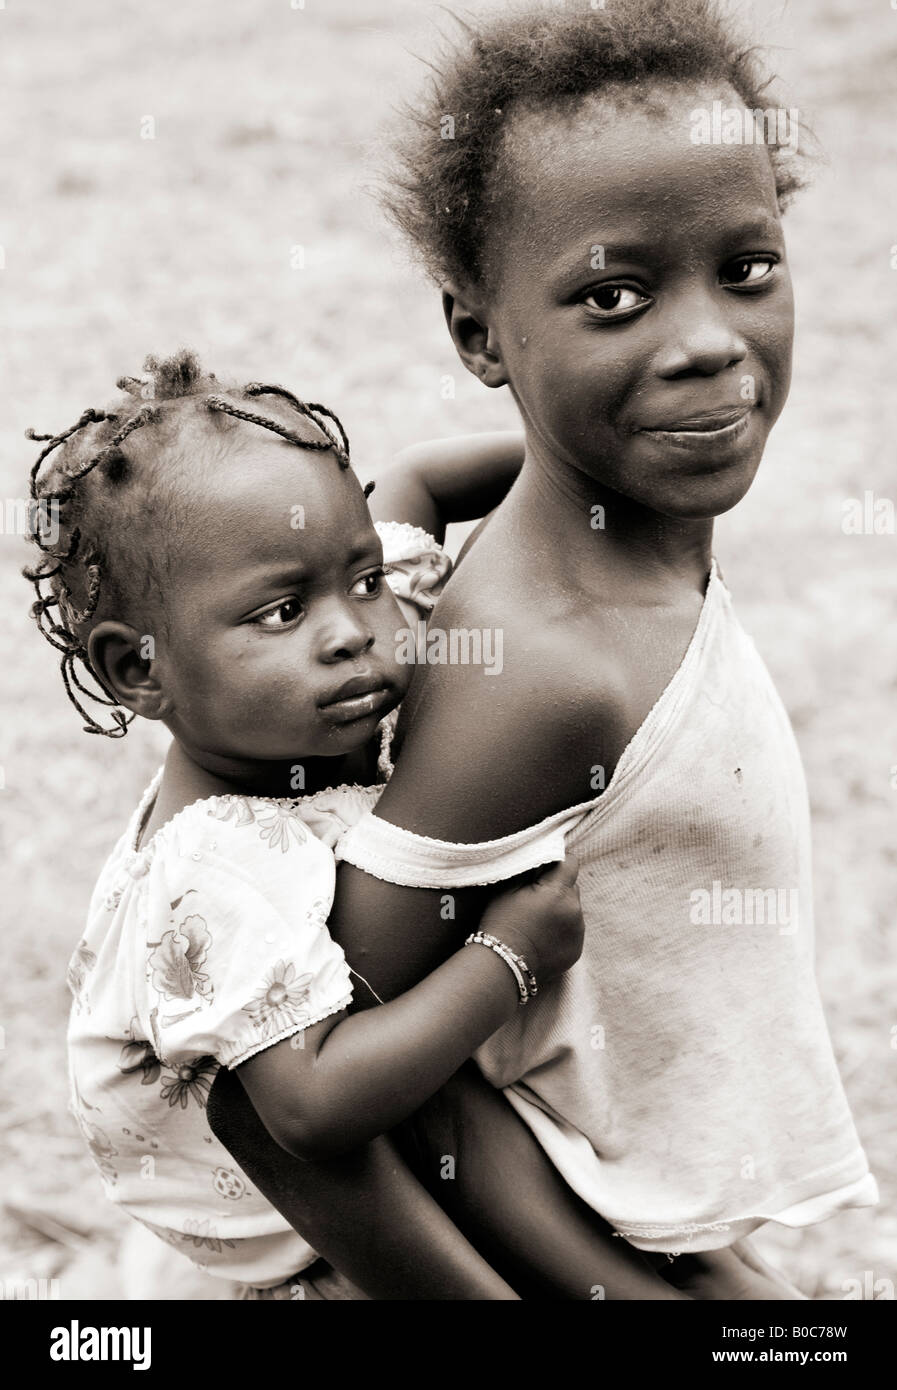 Black and white, monochrome, sepia toned photograph of a young Gambian African girl carrying her baby sister piggy-back style. Stock Photo